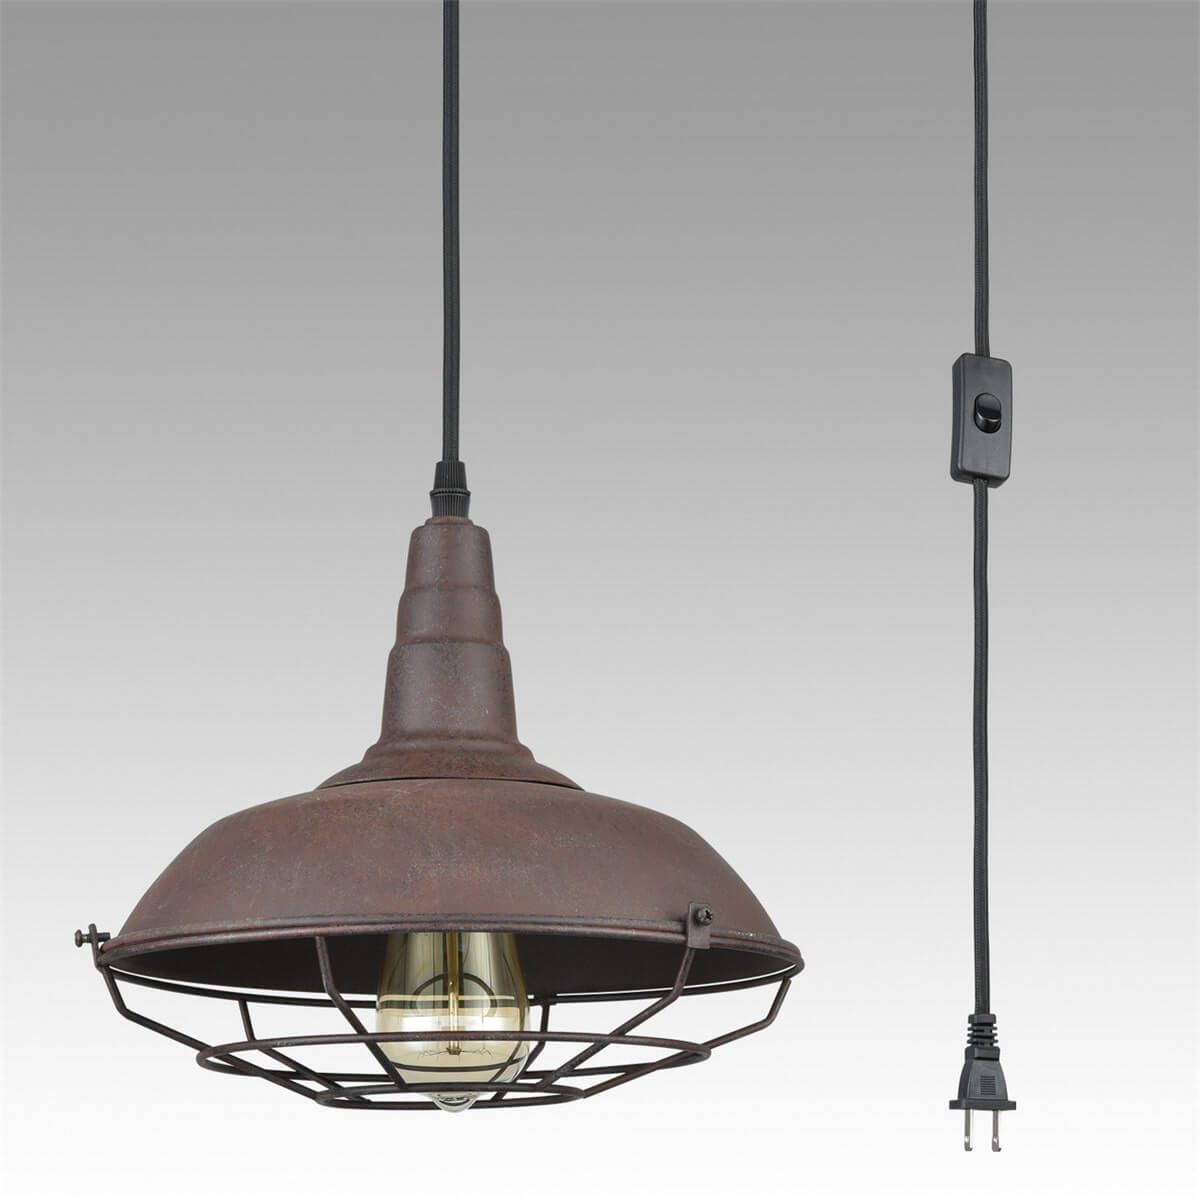 Farmhouse Plug-In Pendant Light Rust Finish with Metal Cage Shade